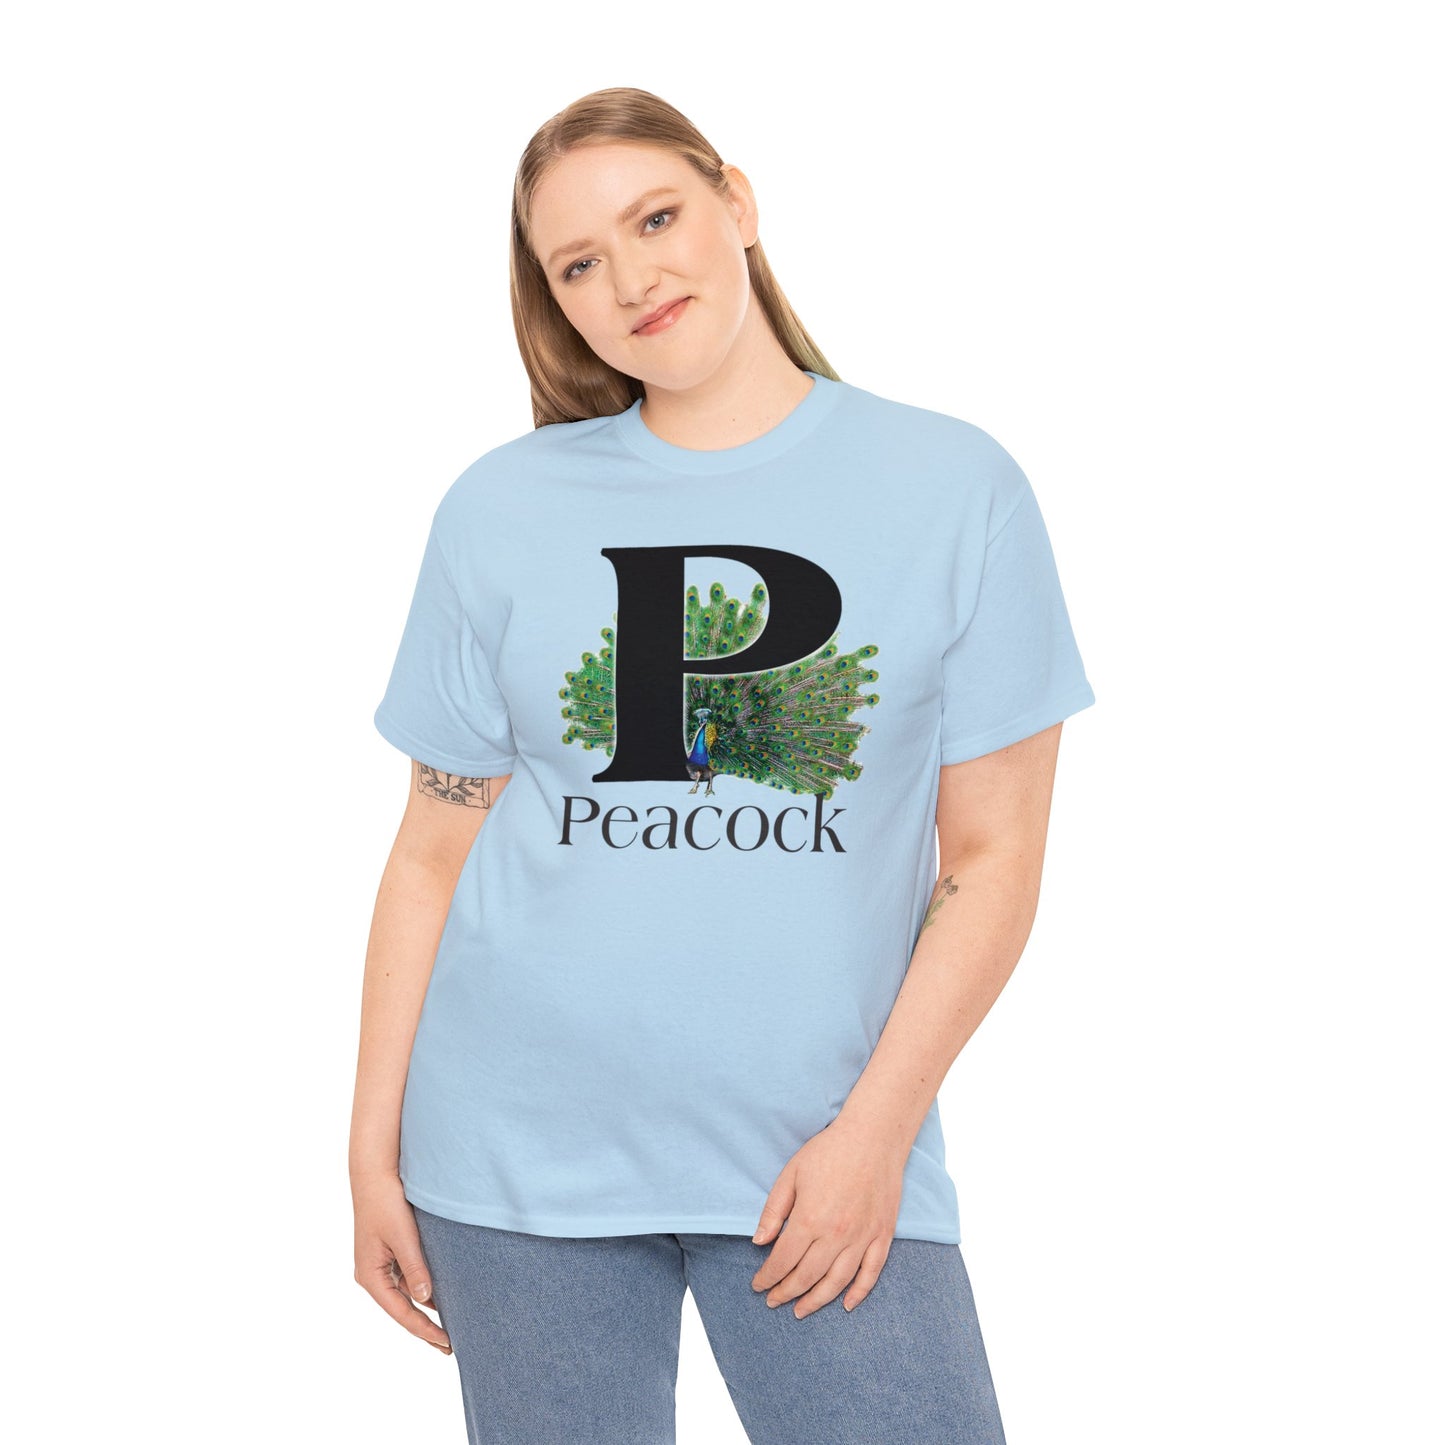 P is for Peacock T-Shirt, Peacock Feathers Fanned out, Bird Shirt, Drawing T-Shirt, animal t-shirt,